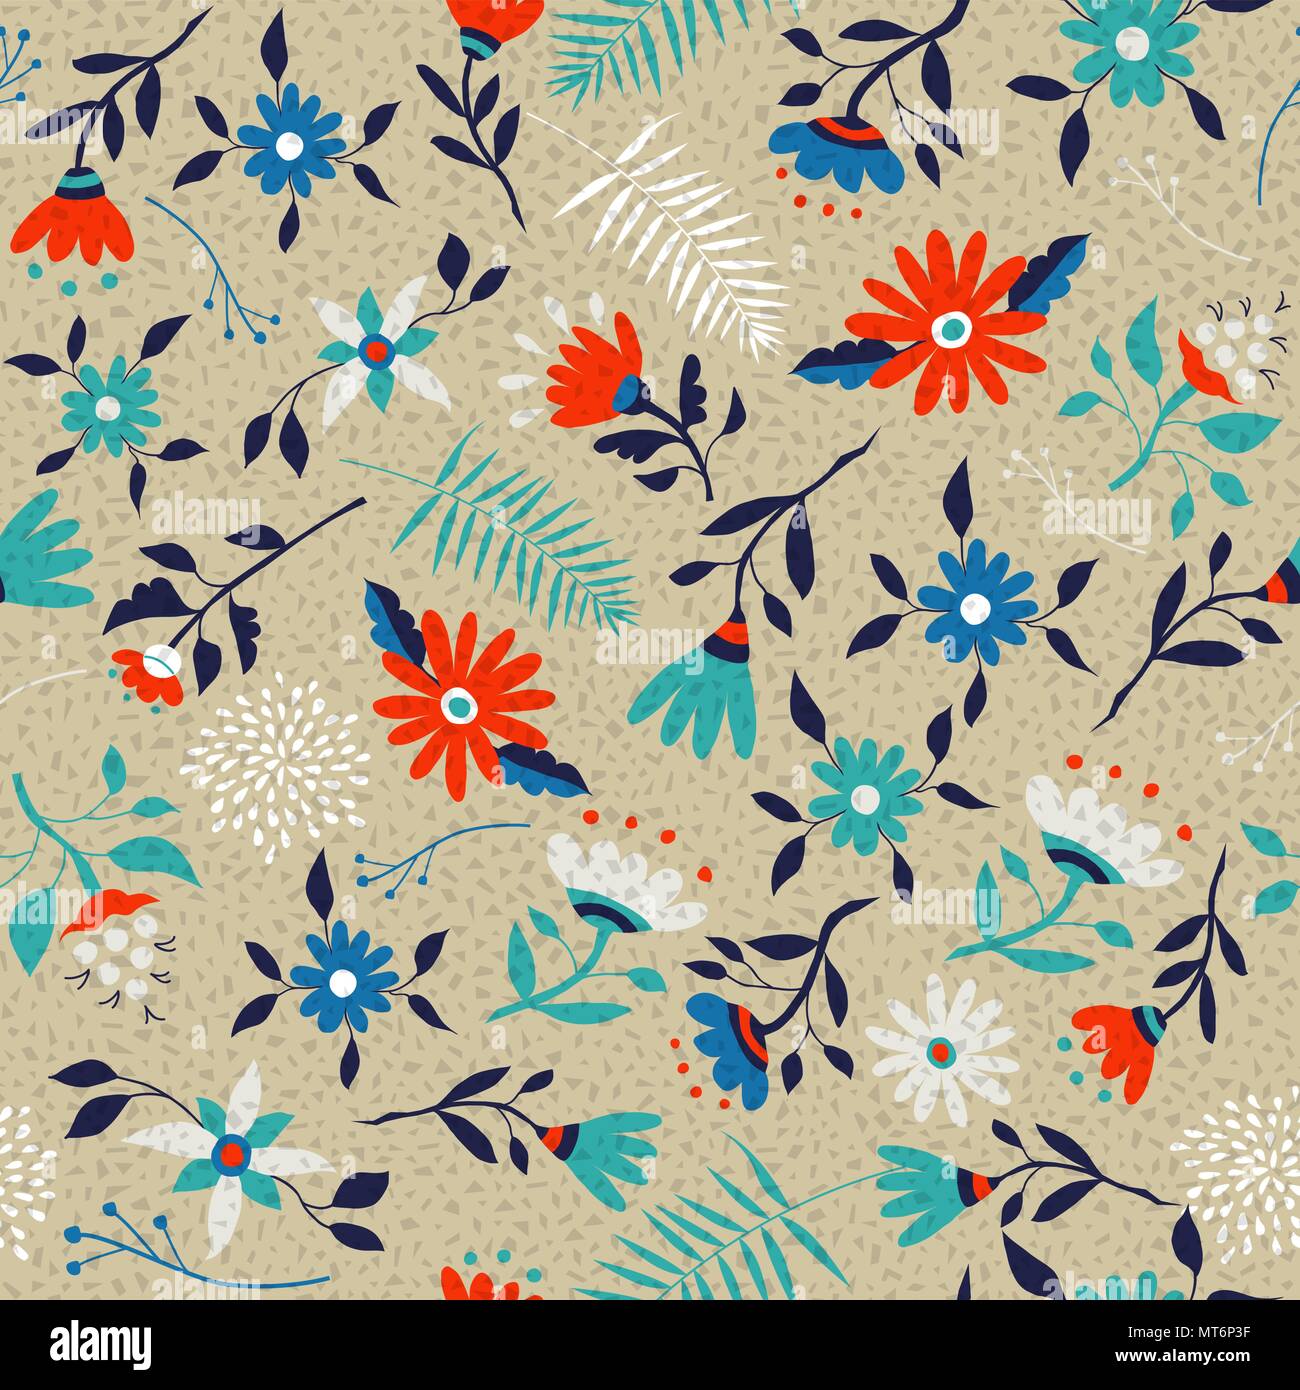 Floral seamless pattern art, traditional retro ditsy design with colorful spring flowers and leaves. EPS10 vector. Stock Vector